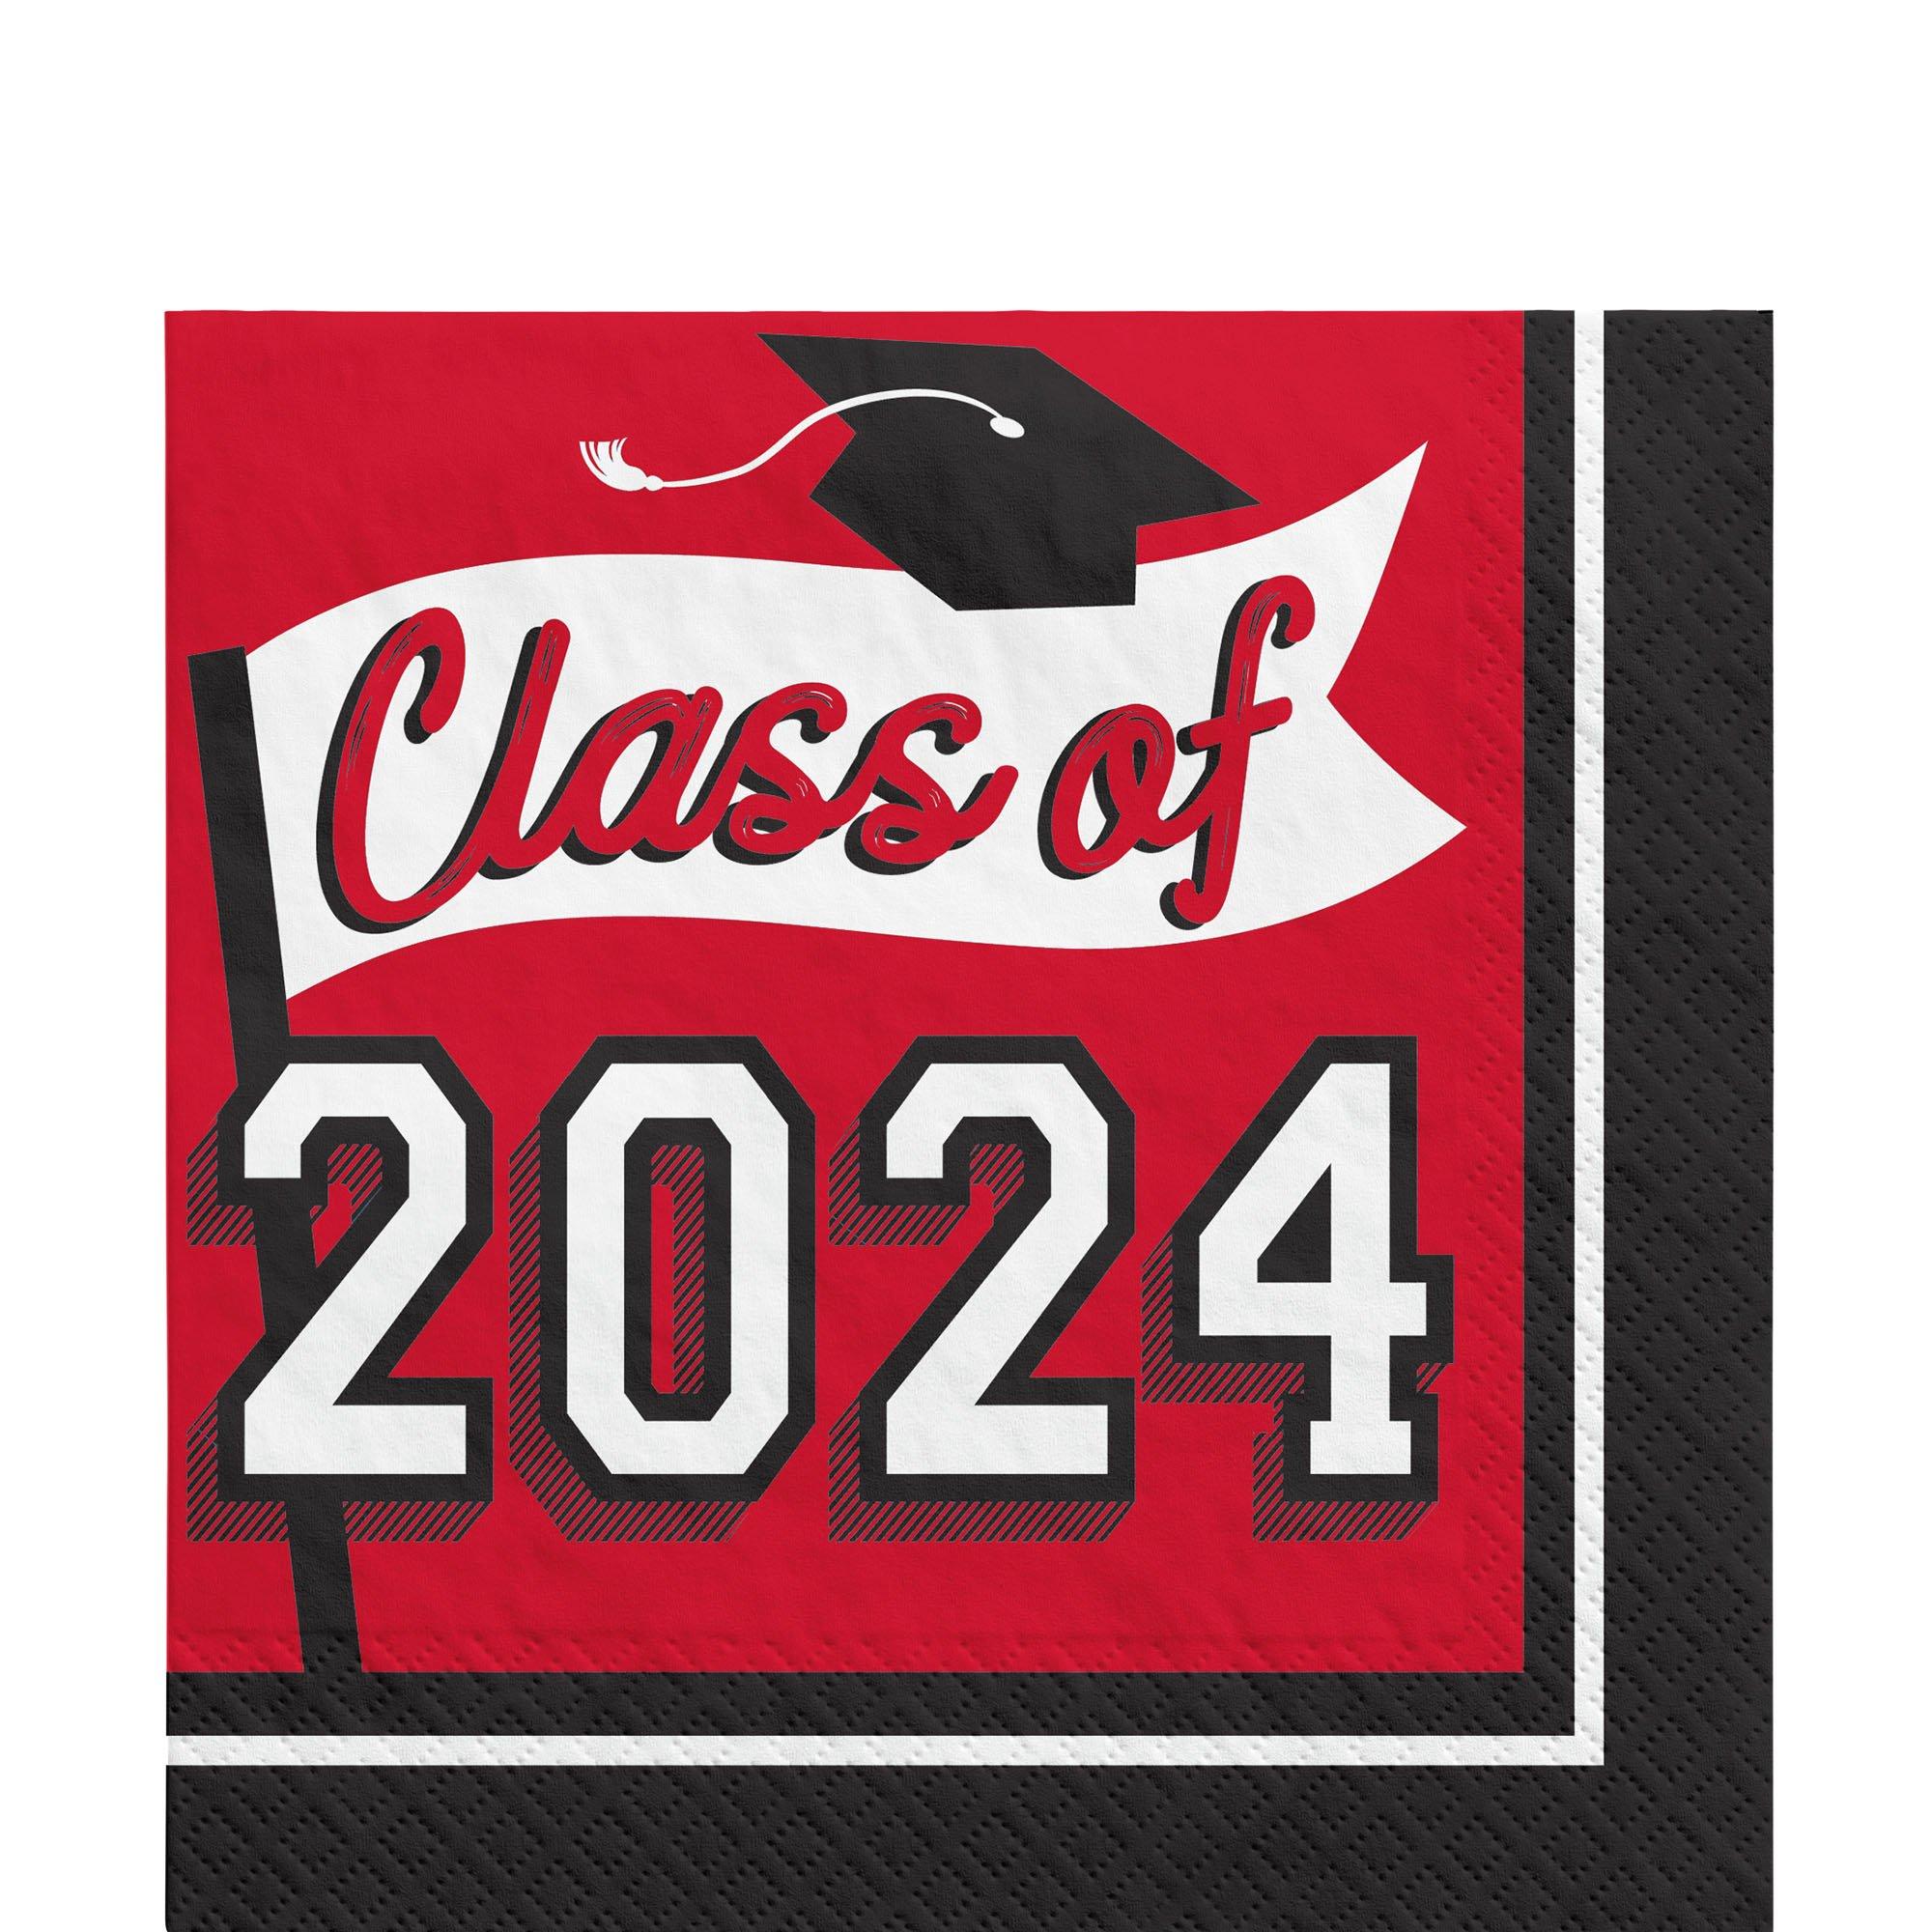 Class of 2024 Graduation Paper Lunch Napkins, 6.5in, 40ct - True to Your School